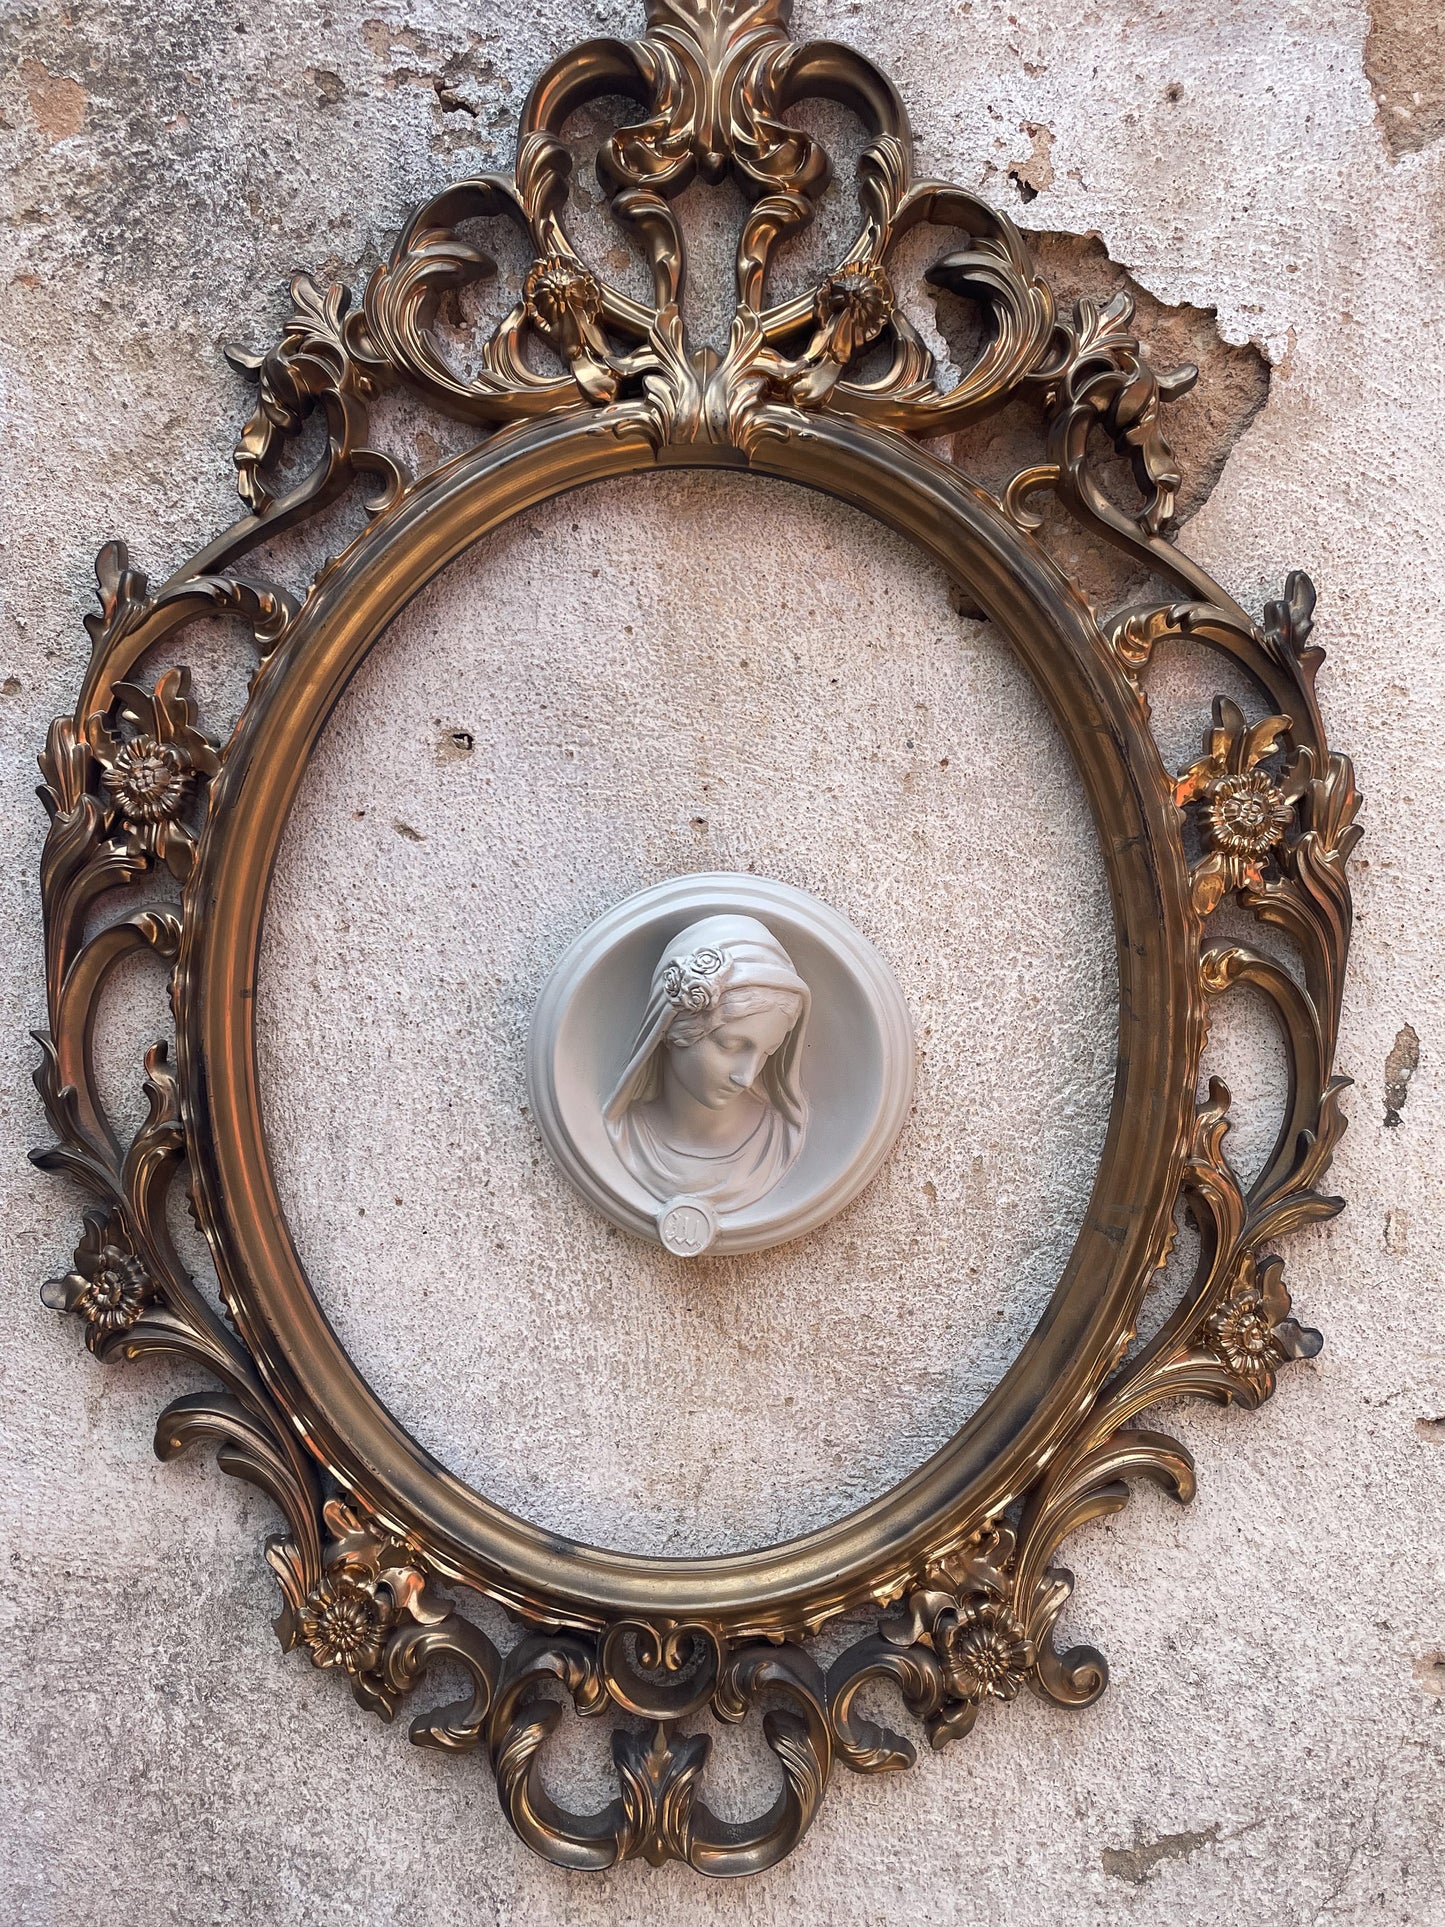 Ex-voto face of Mary in relief "Selfie"